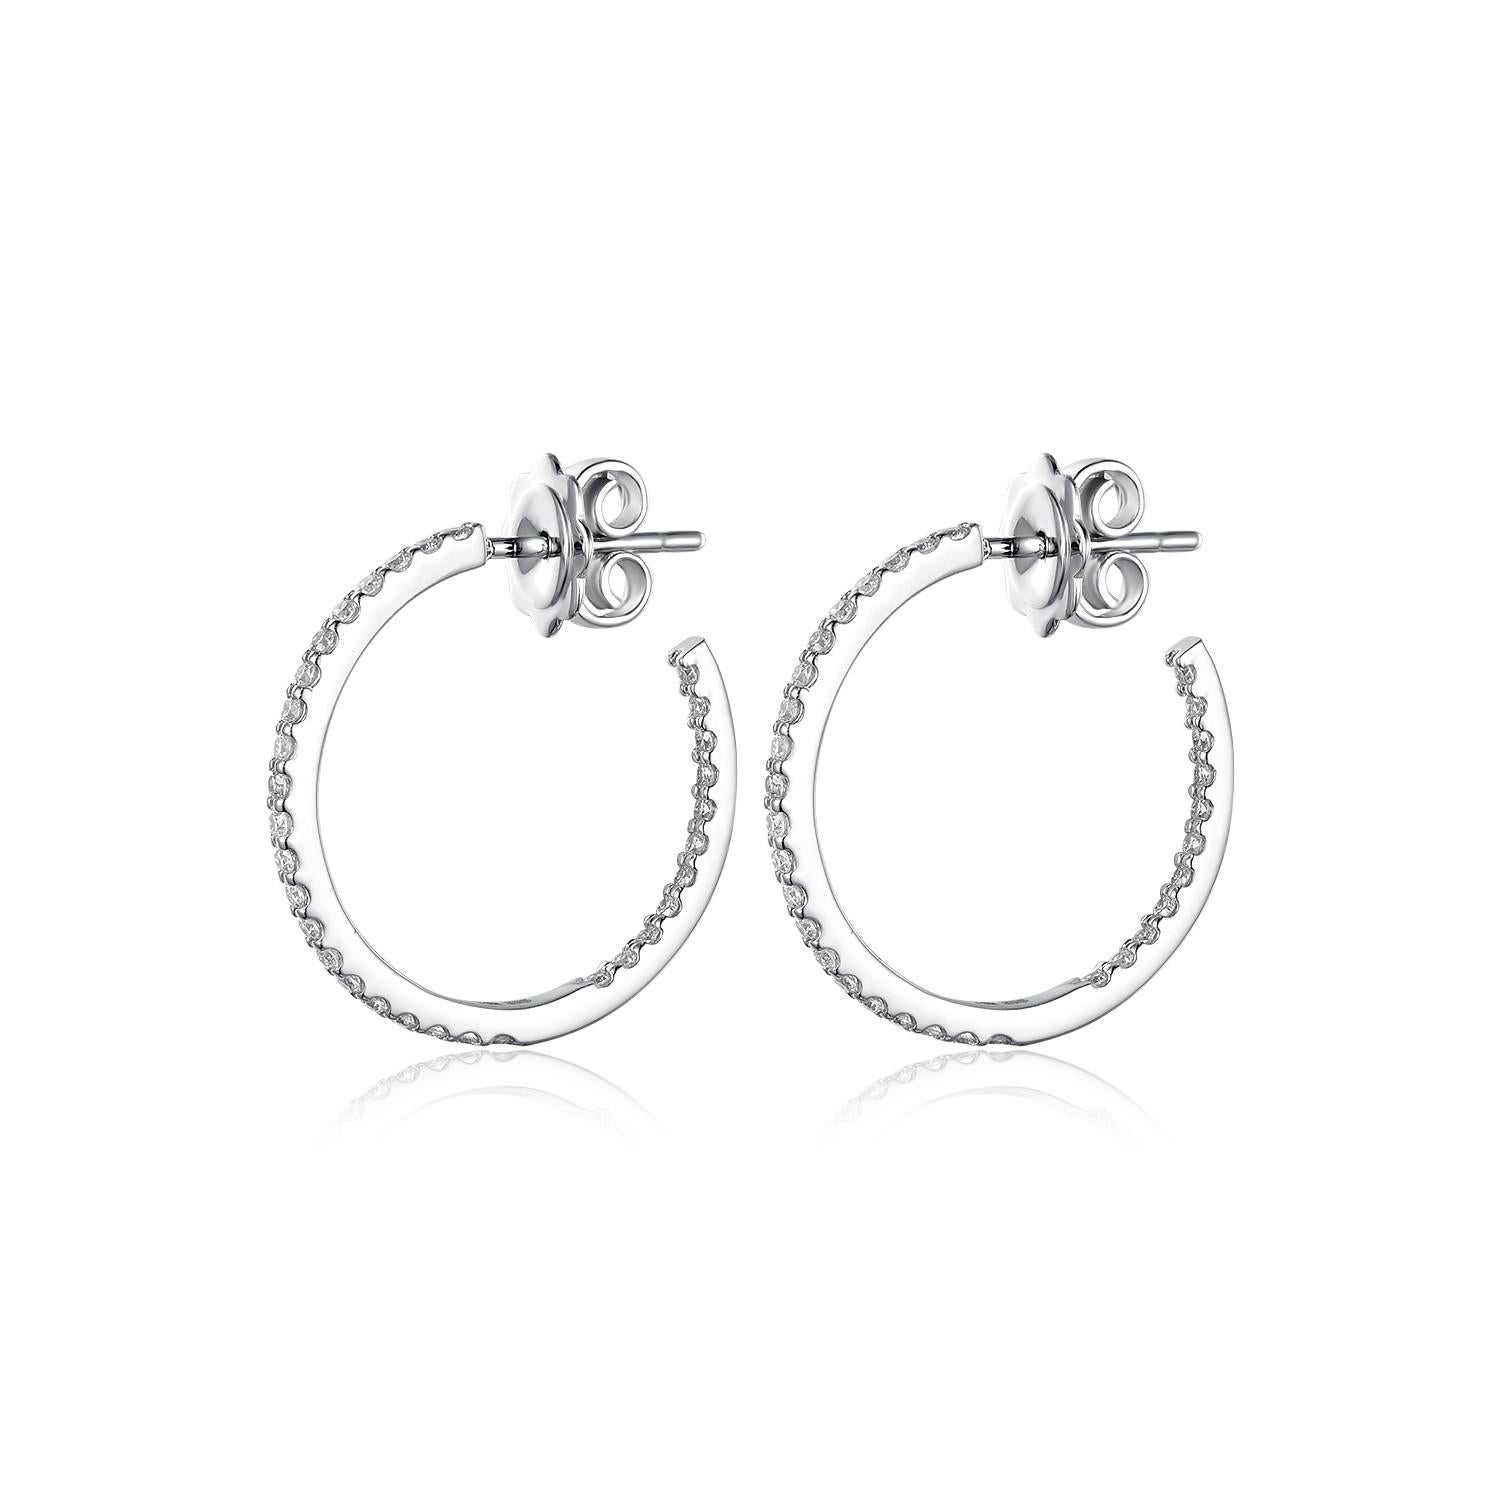 These classic hoop earrings, finely crafted from 14 karat white gold, are a quintessential addition to any jewelry collection. They feature a full circle of radiant diamonds, totaling 0.55 carats, that encrust the surface with a dazzling display of